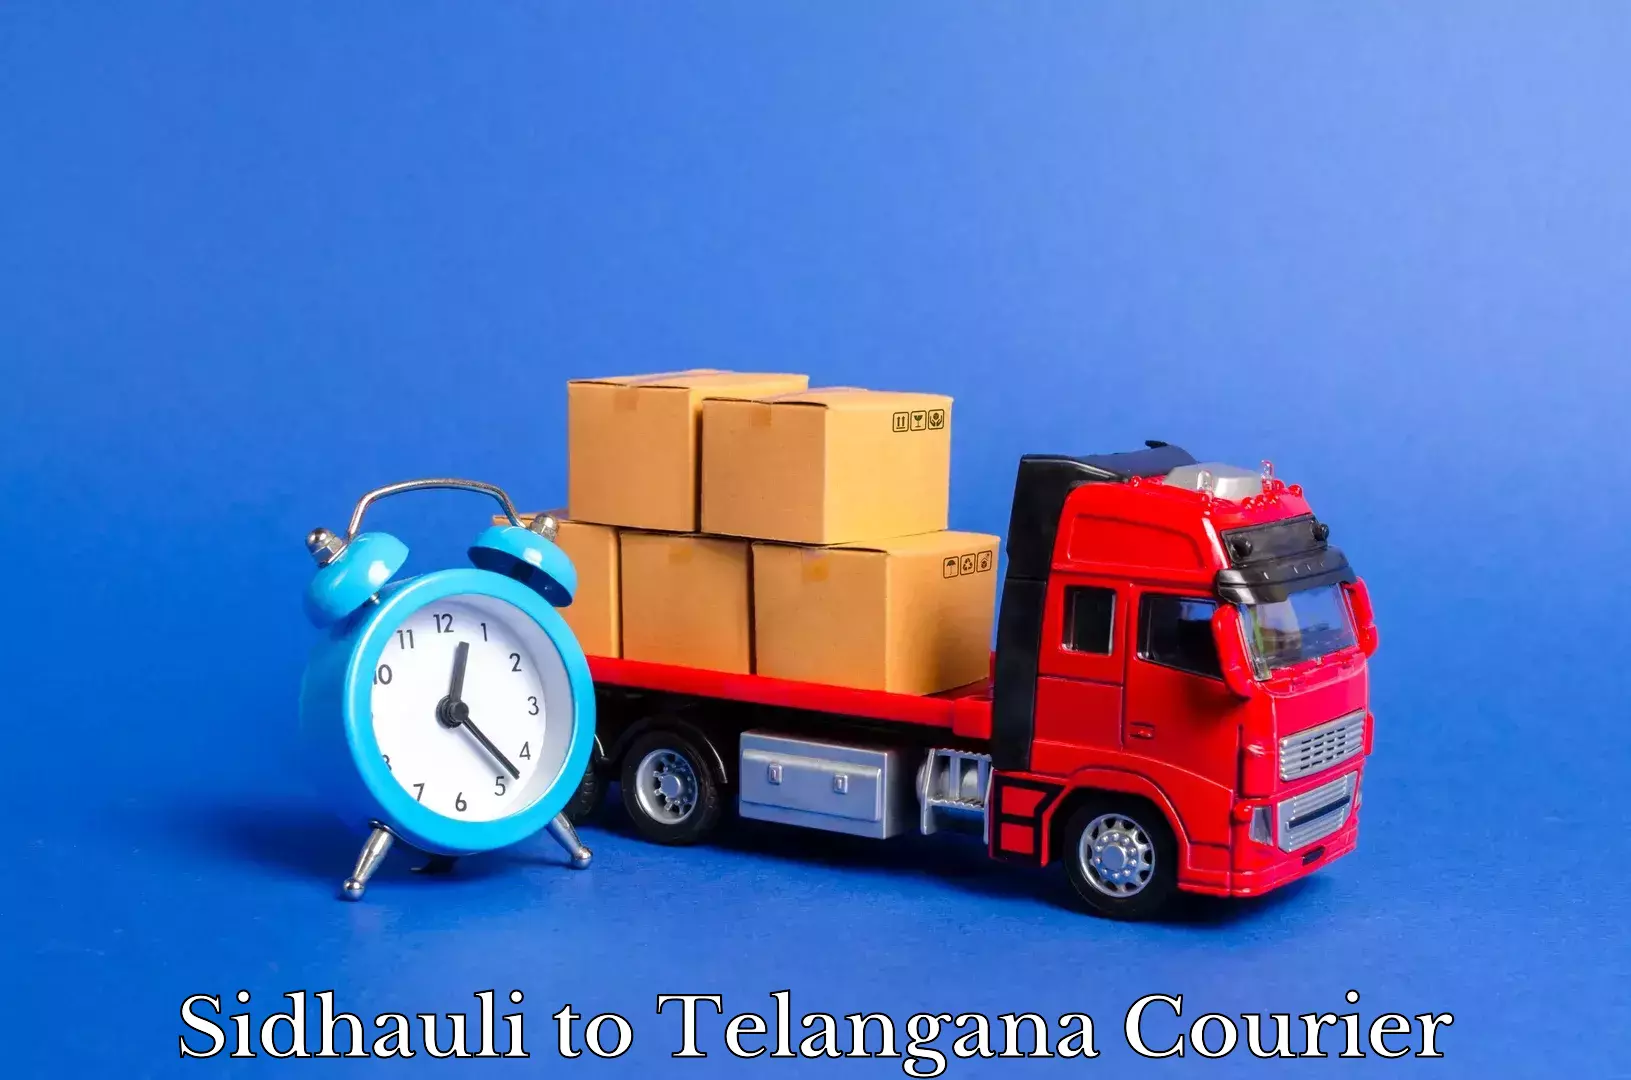 Household transport experts Sidhauli to Mancherial